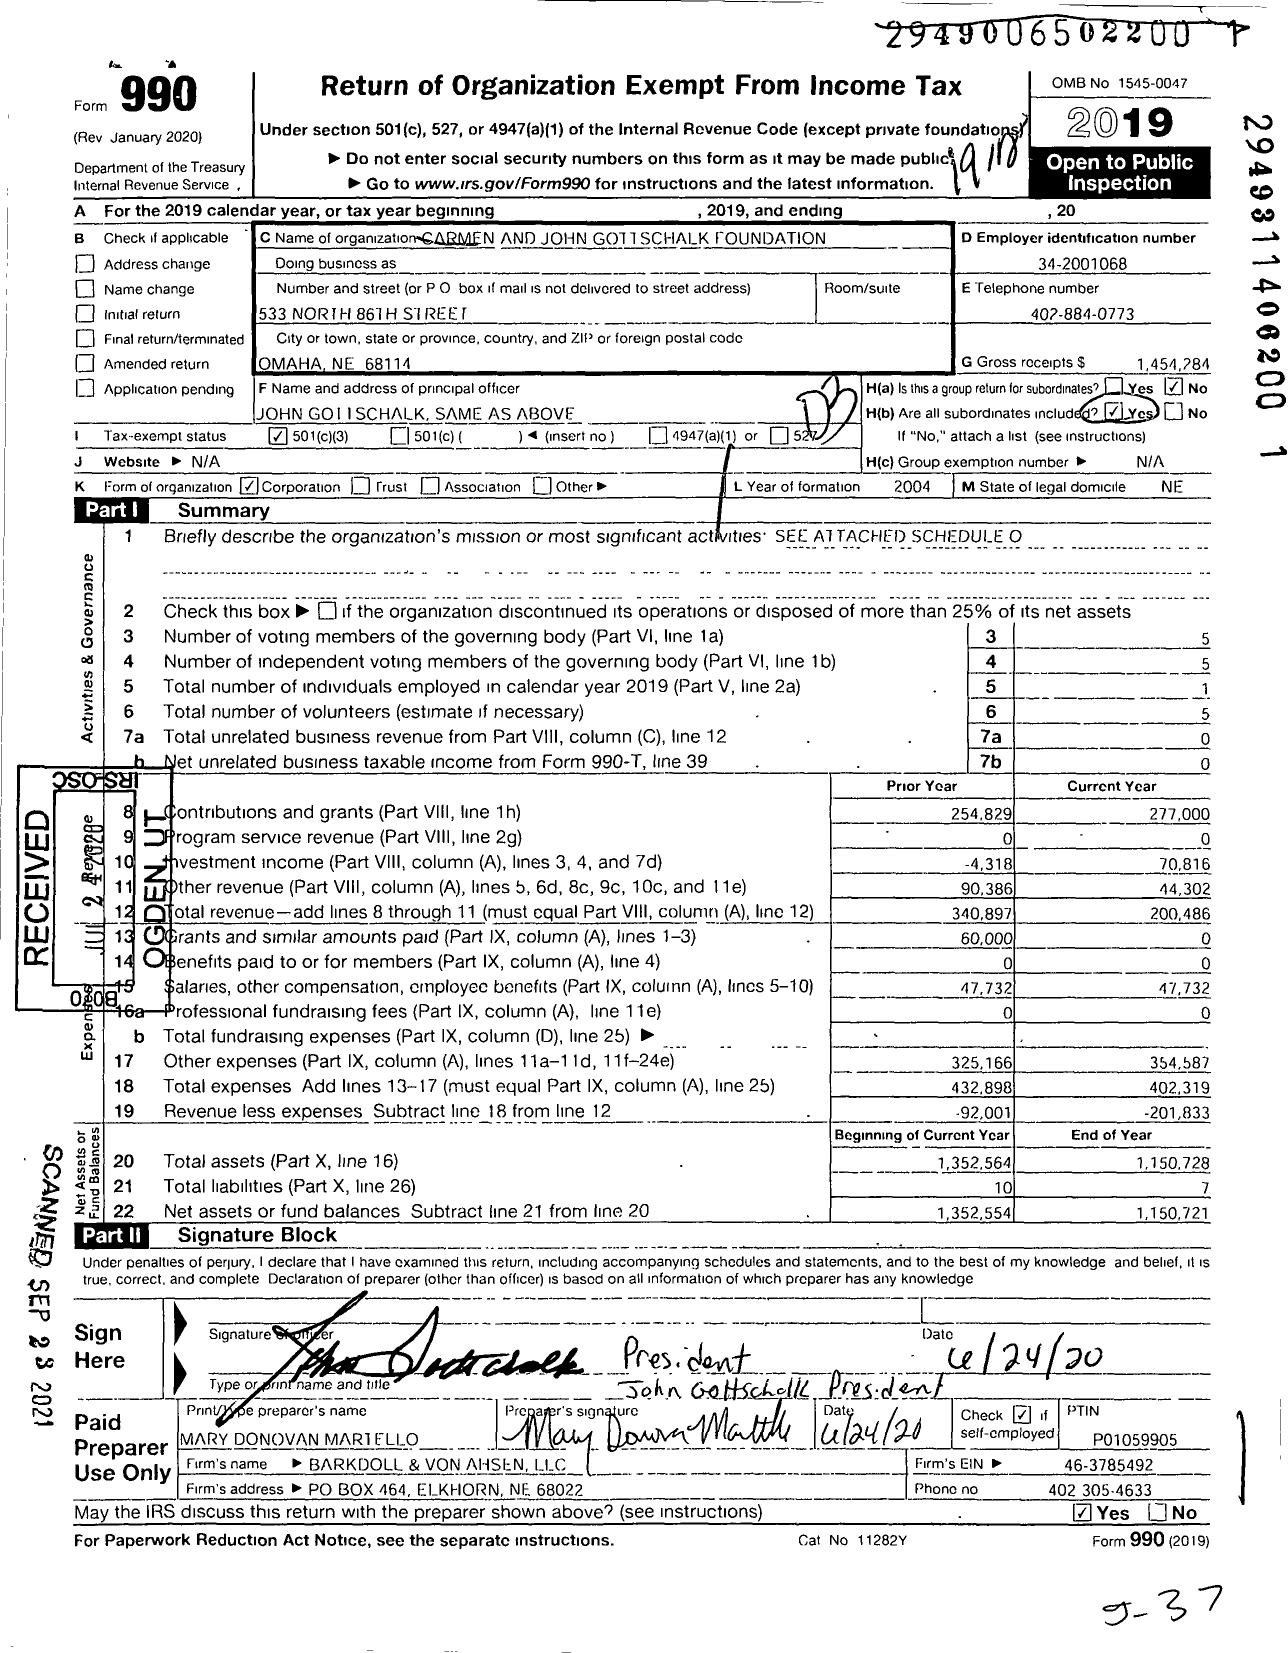 Image of first page of 2019 Form 990 for Carmen and John Gottschalk Foundation